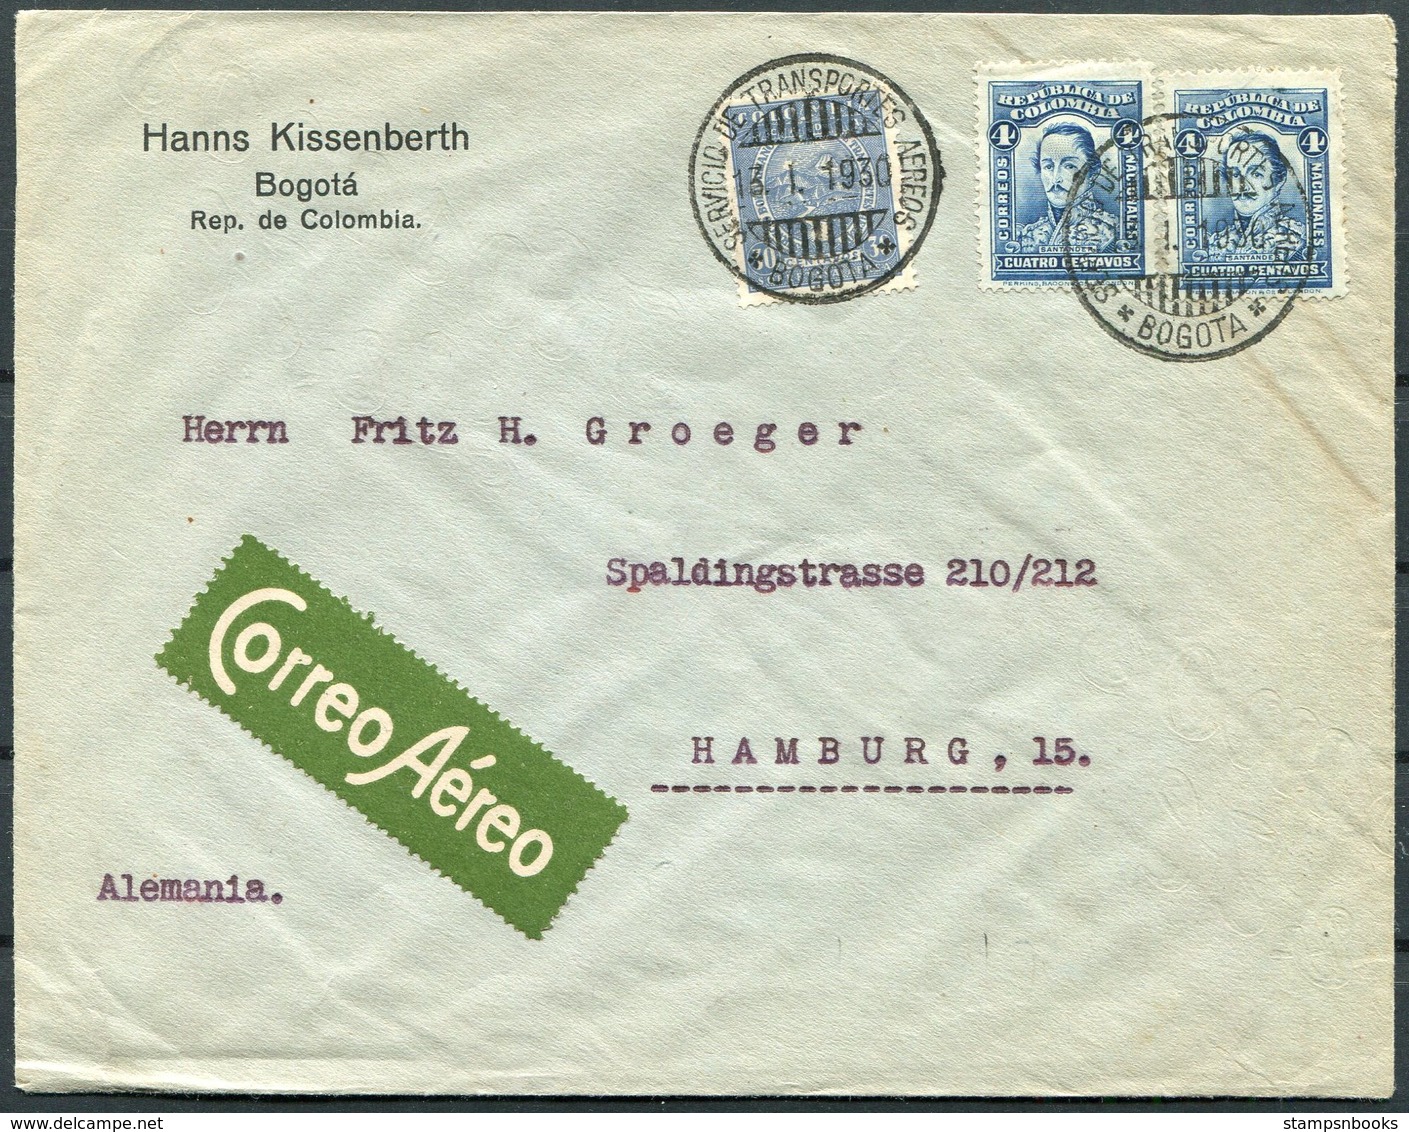 1930 Colombia Hanns Kissenberth, Bogota Airmail Cover - Hamburg Germany - Colombia